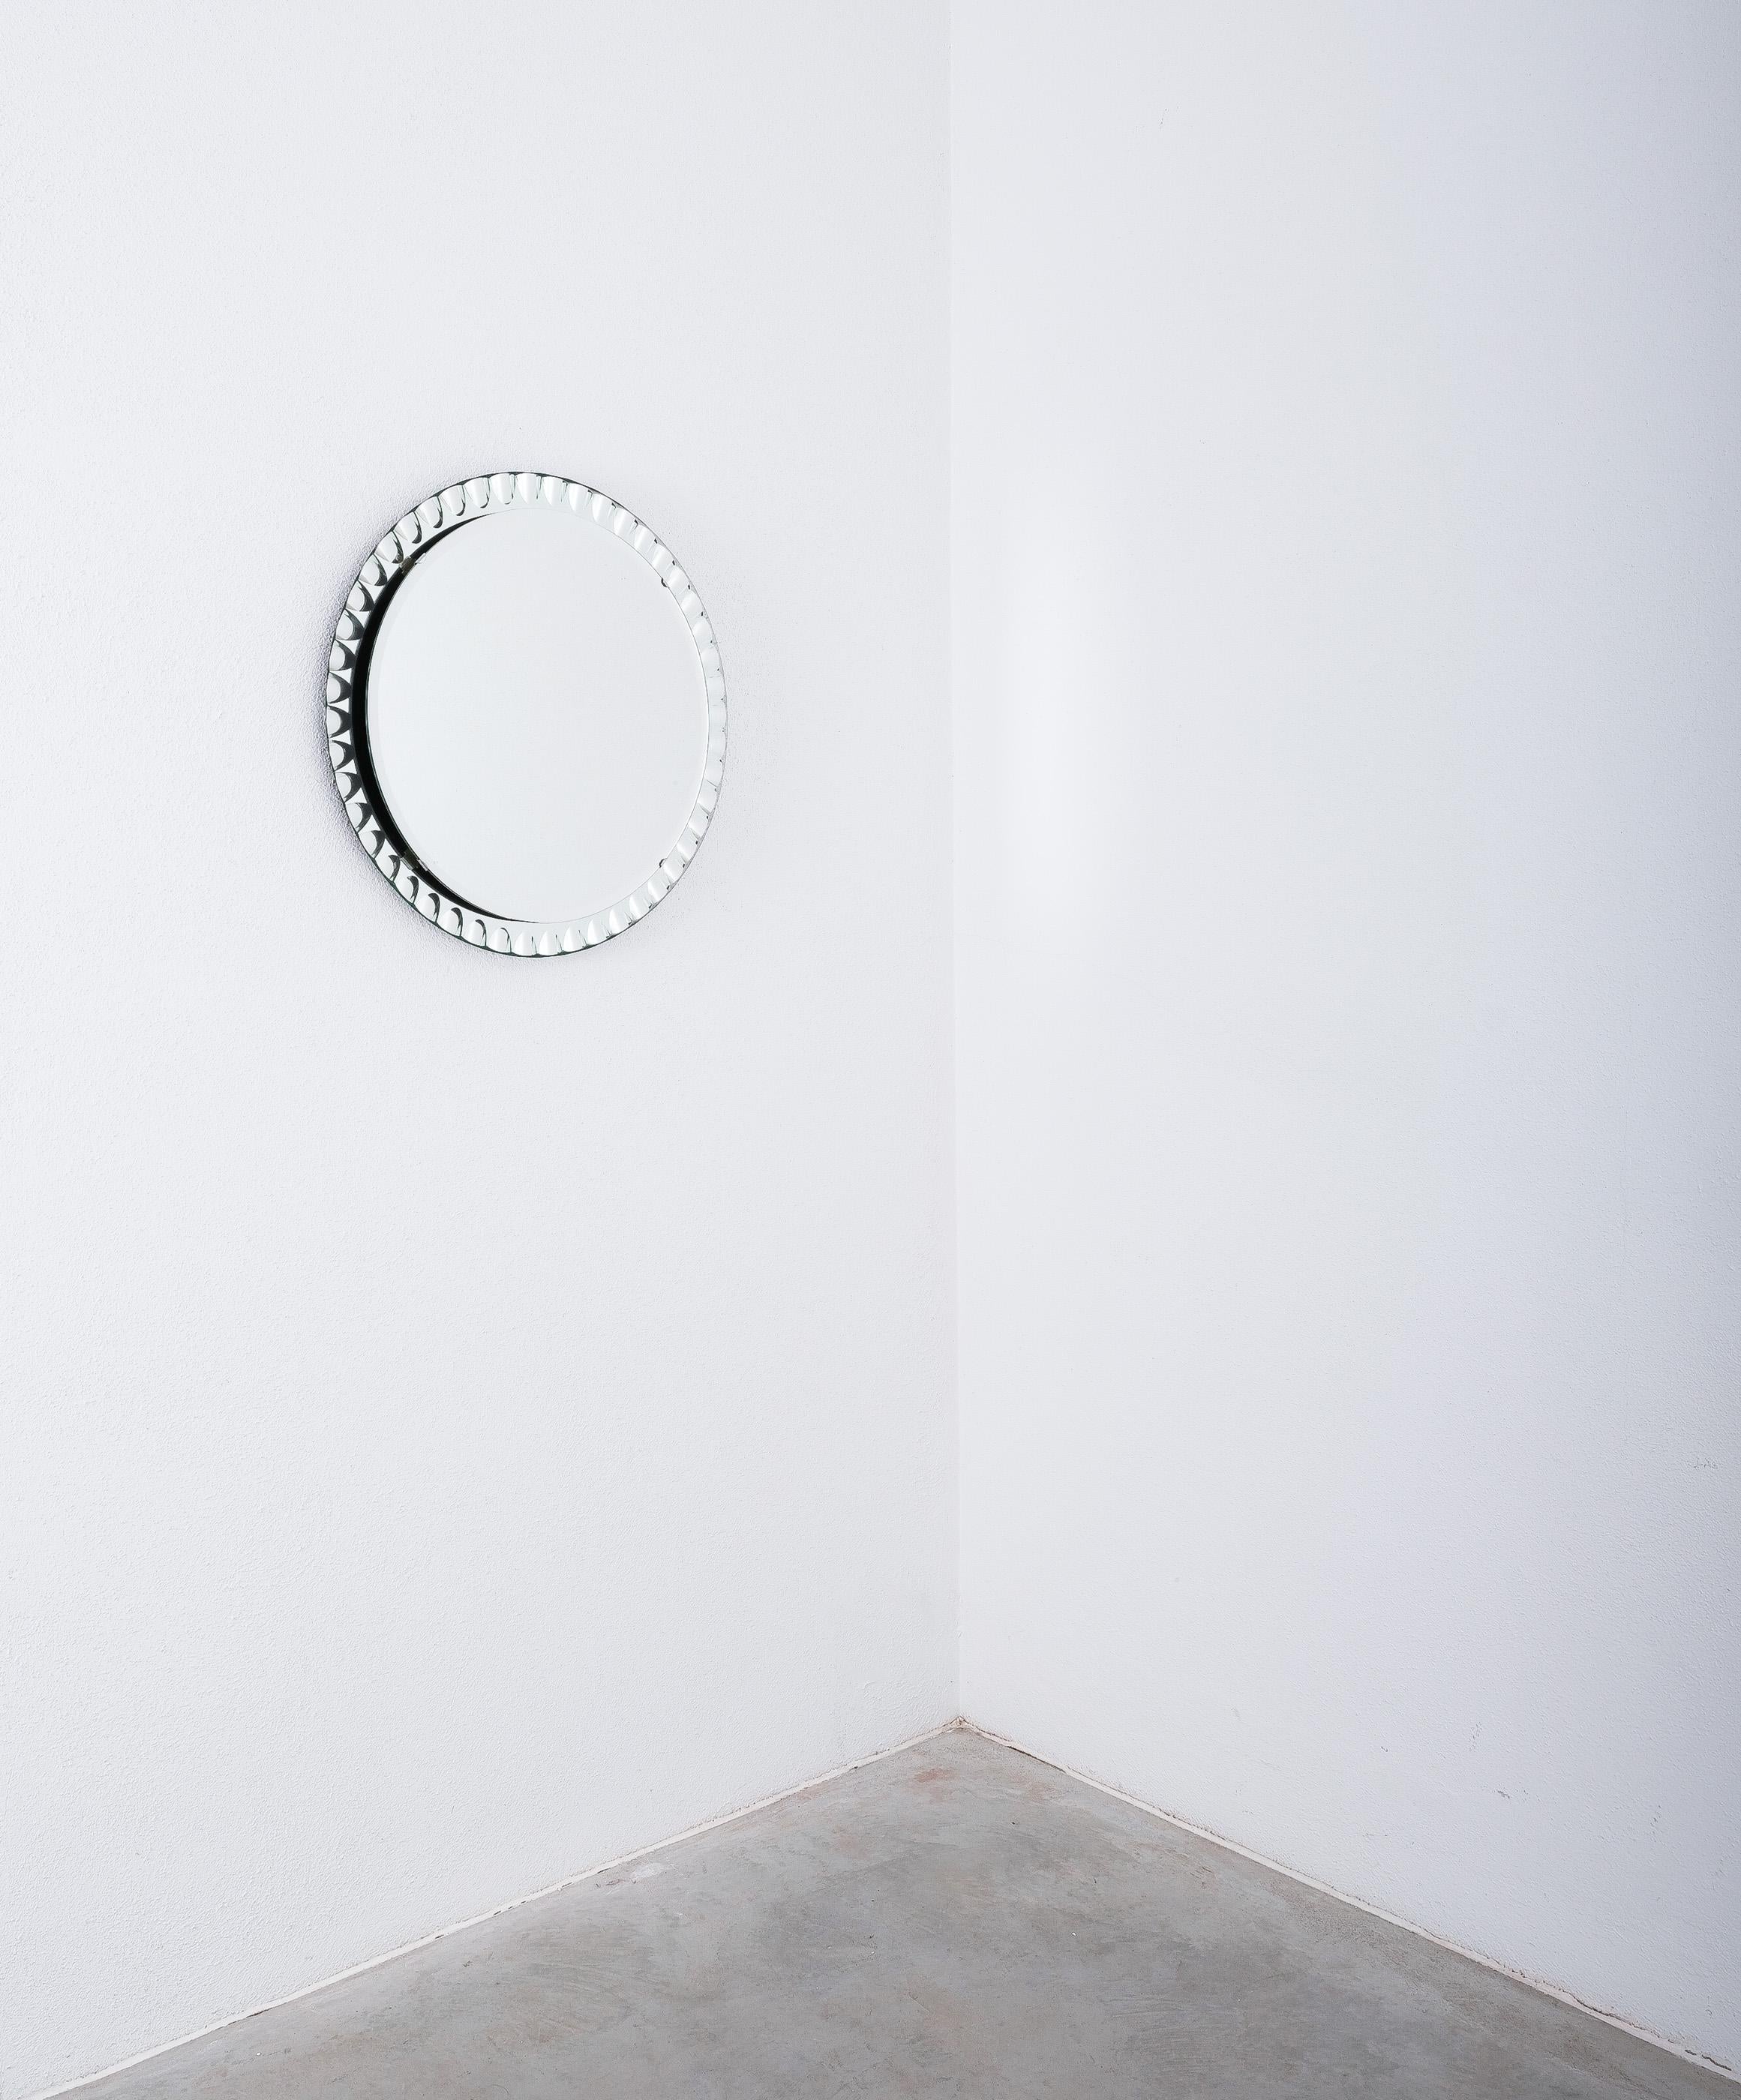 Wall mirror by Cristal Art, Torino, circa 1955 glass mid-century. 

27” wall mirror with a mirrored optical glass frame and a round central mirror (20